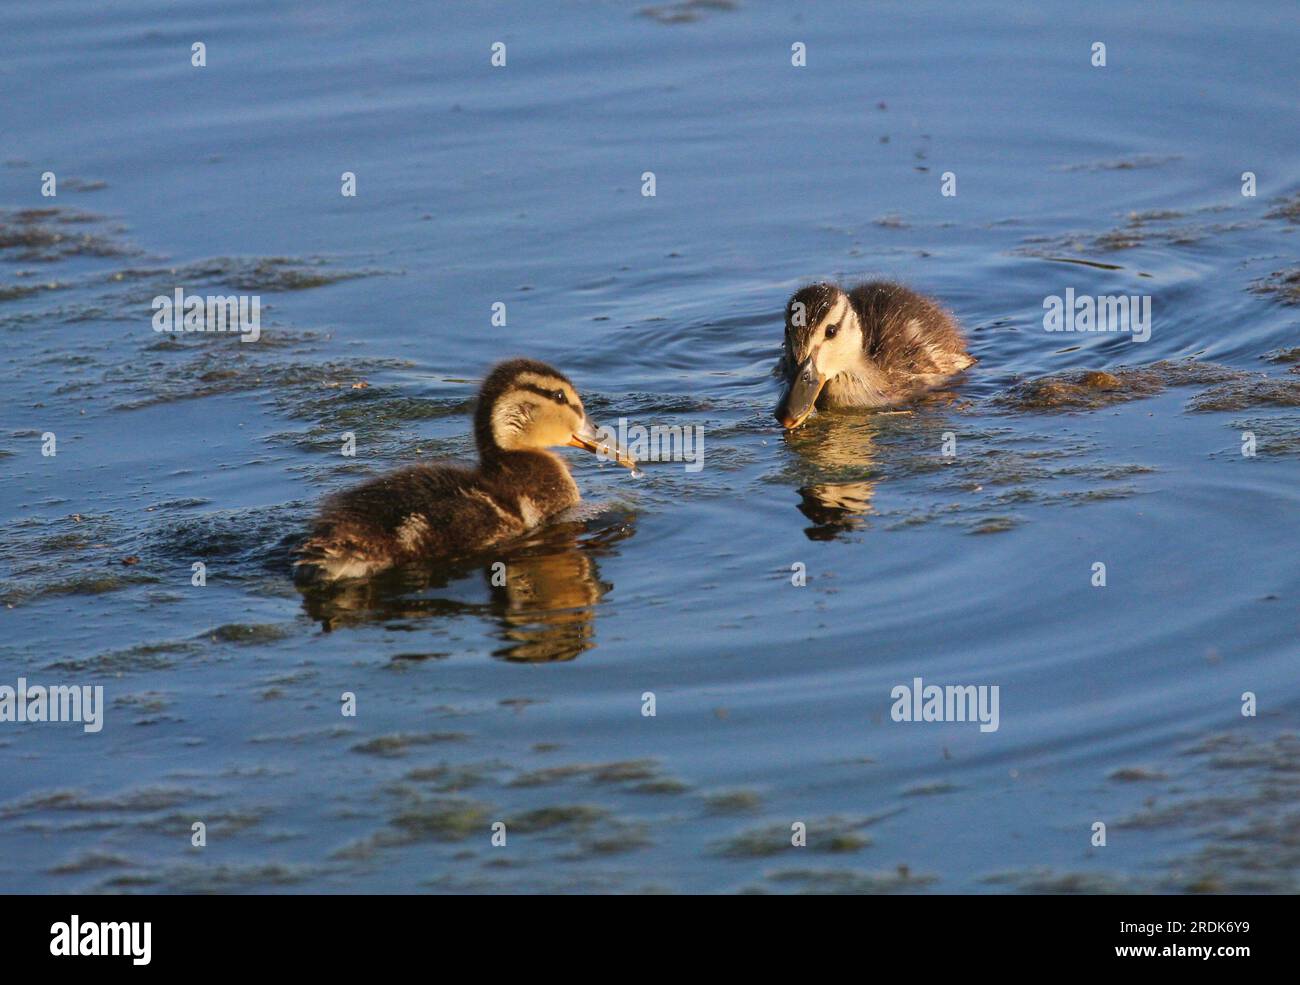 Two ducklings swim together. Stock Photo